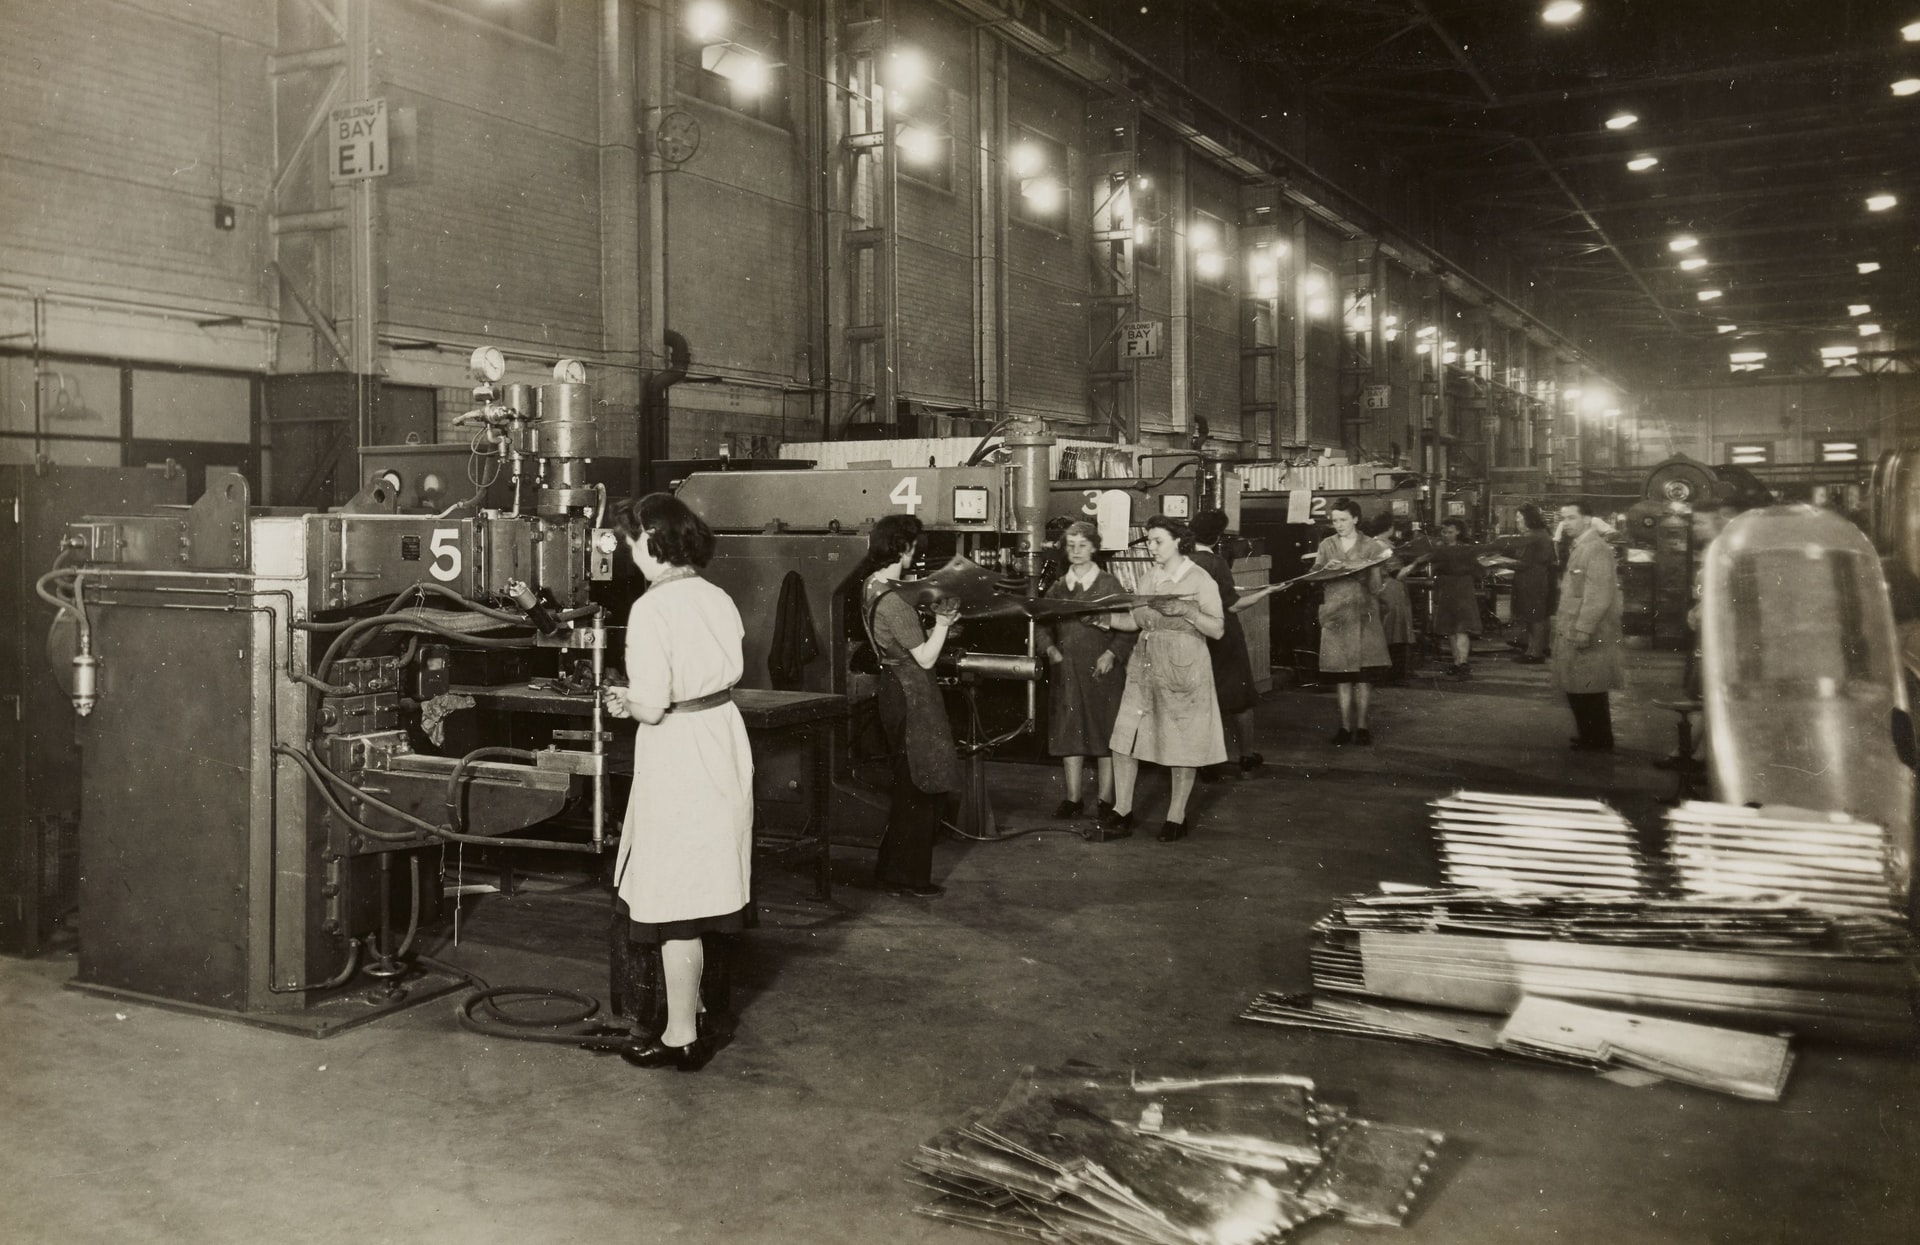 Photo of Spitfire manufacture. WWII World War 2 Castle Bromwich Aeroplane Factory, Birmingham 1940-46. Manufacturers: Vickers Armstrong by Birmingham Museums Trust on Unsplash